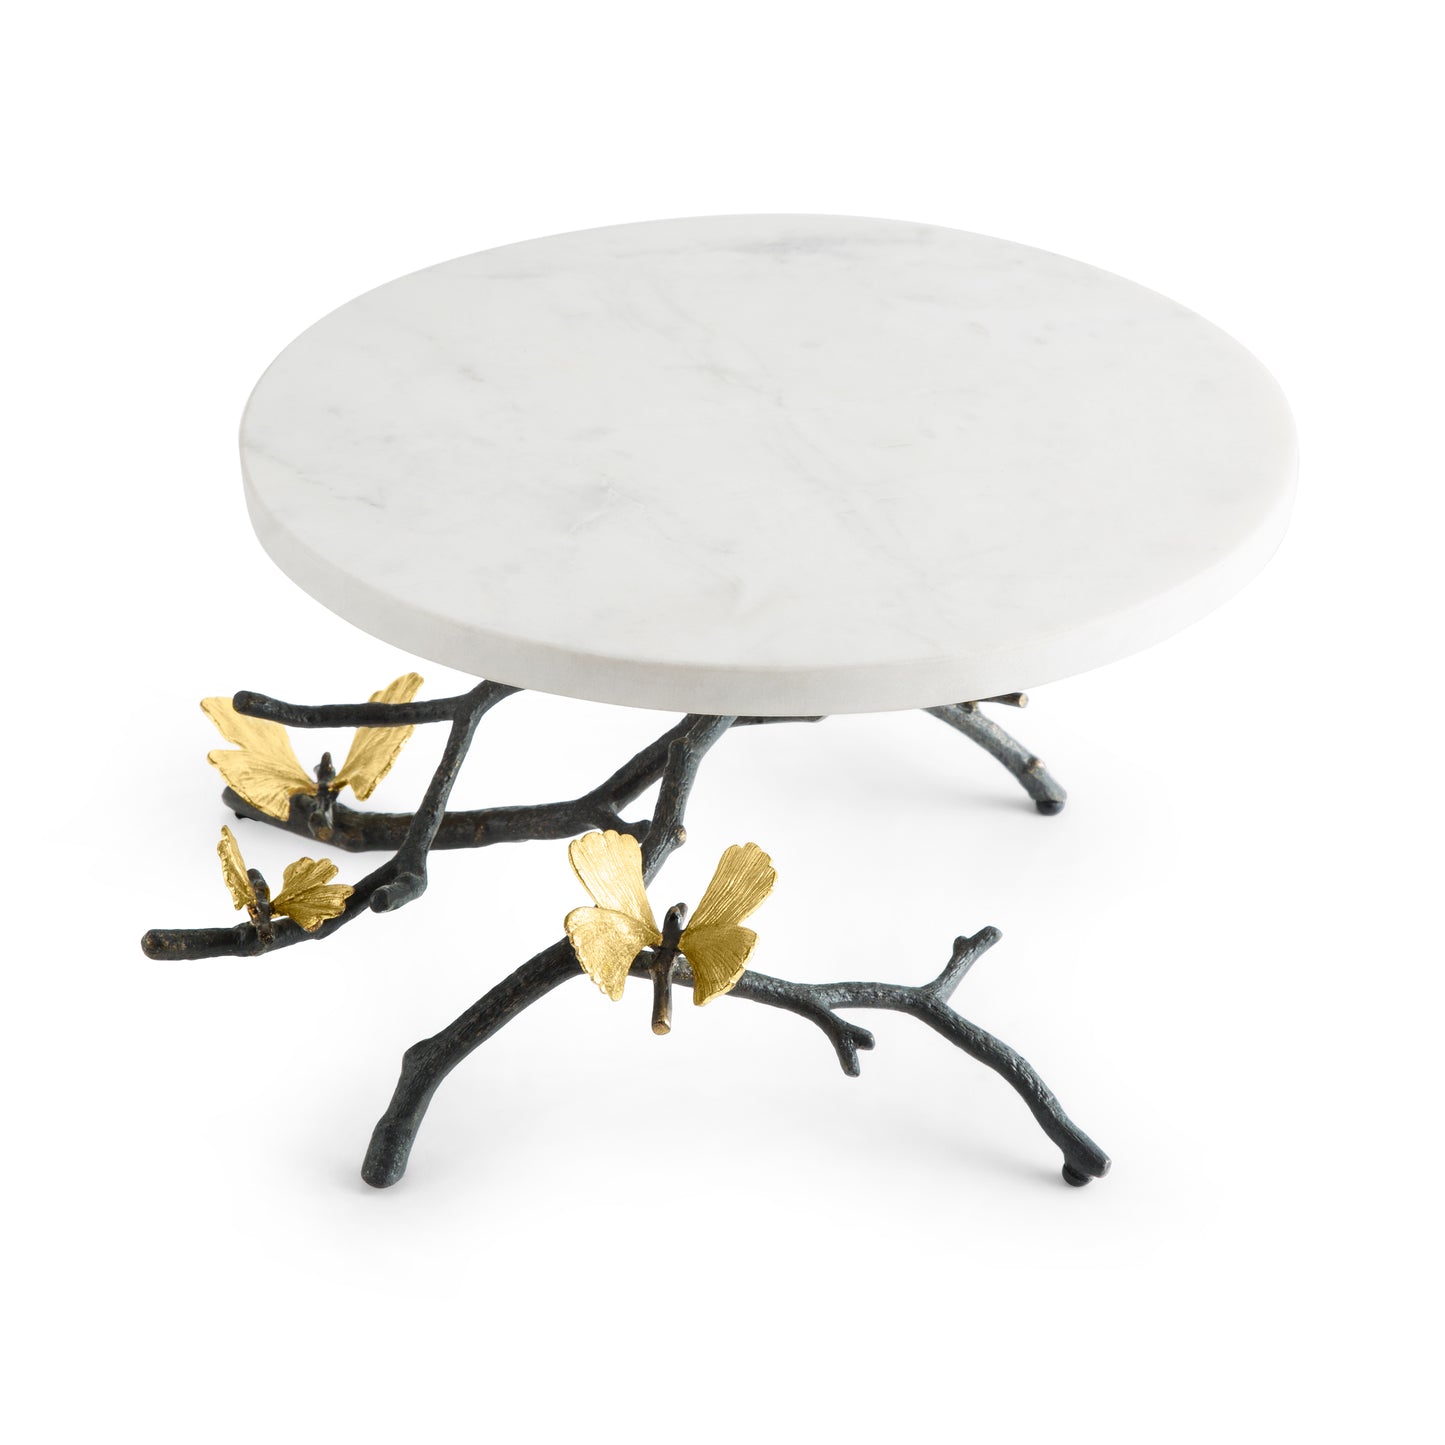 Butterfly Gingko Cake Stand